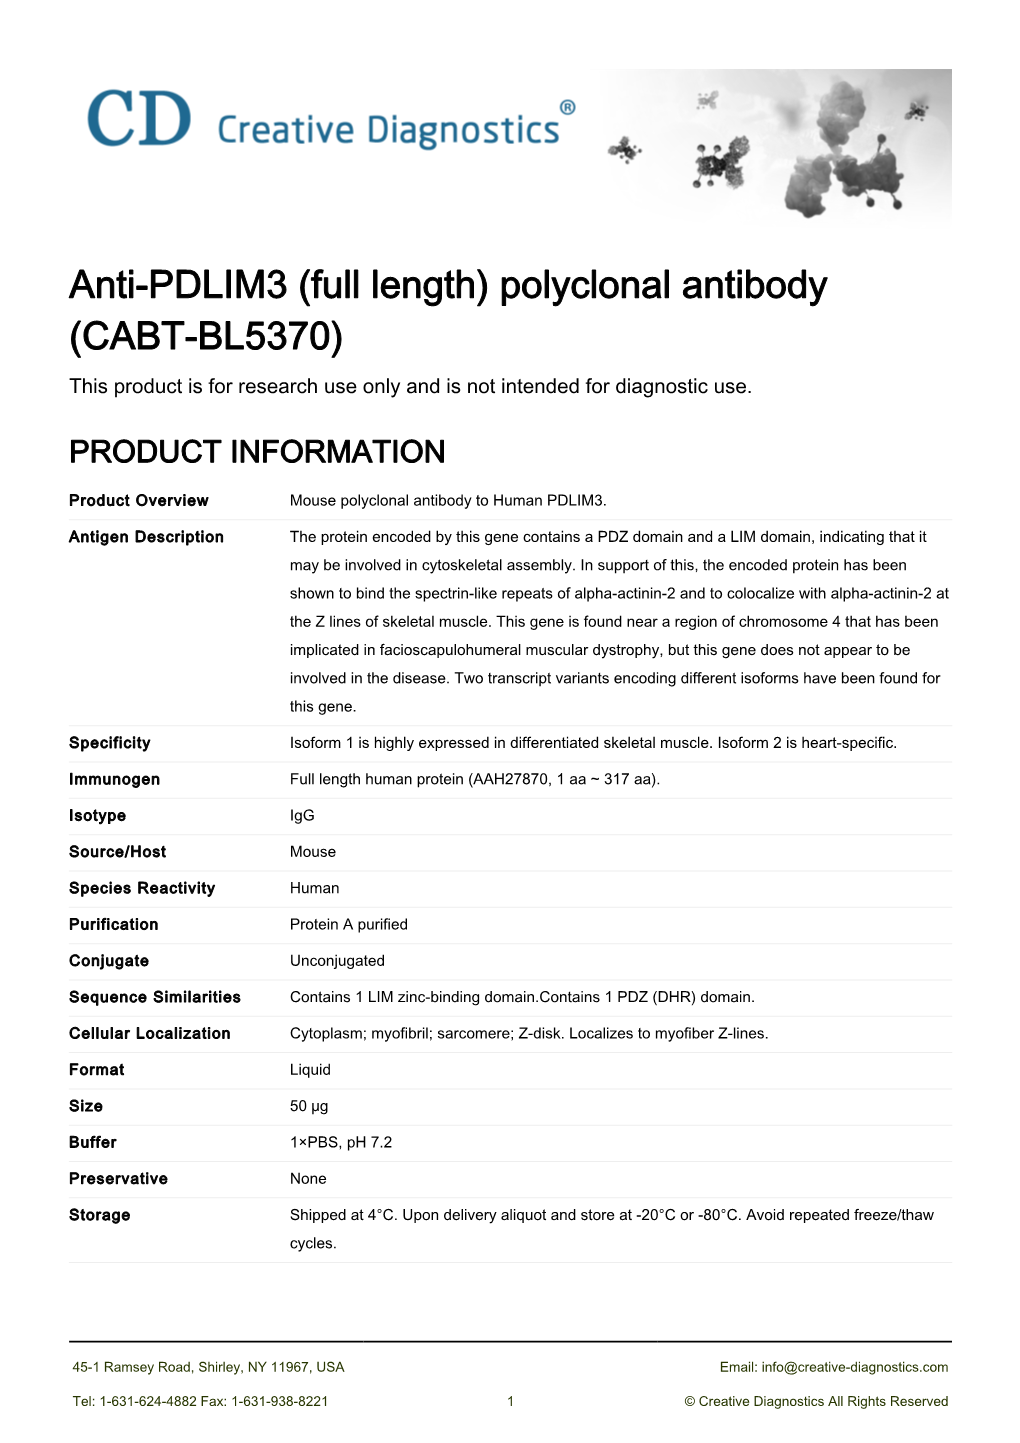 Anti-PDLIM3 (Full Length) Polyclonal Antibody (CABT-BL5370) This Product Is for Research Use Only and Is Not Intended for Diagnostic Use